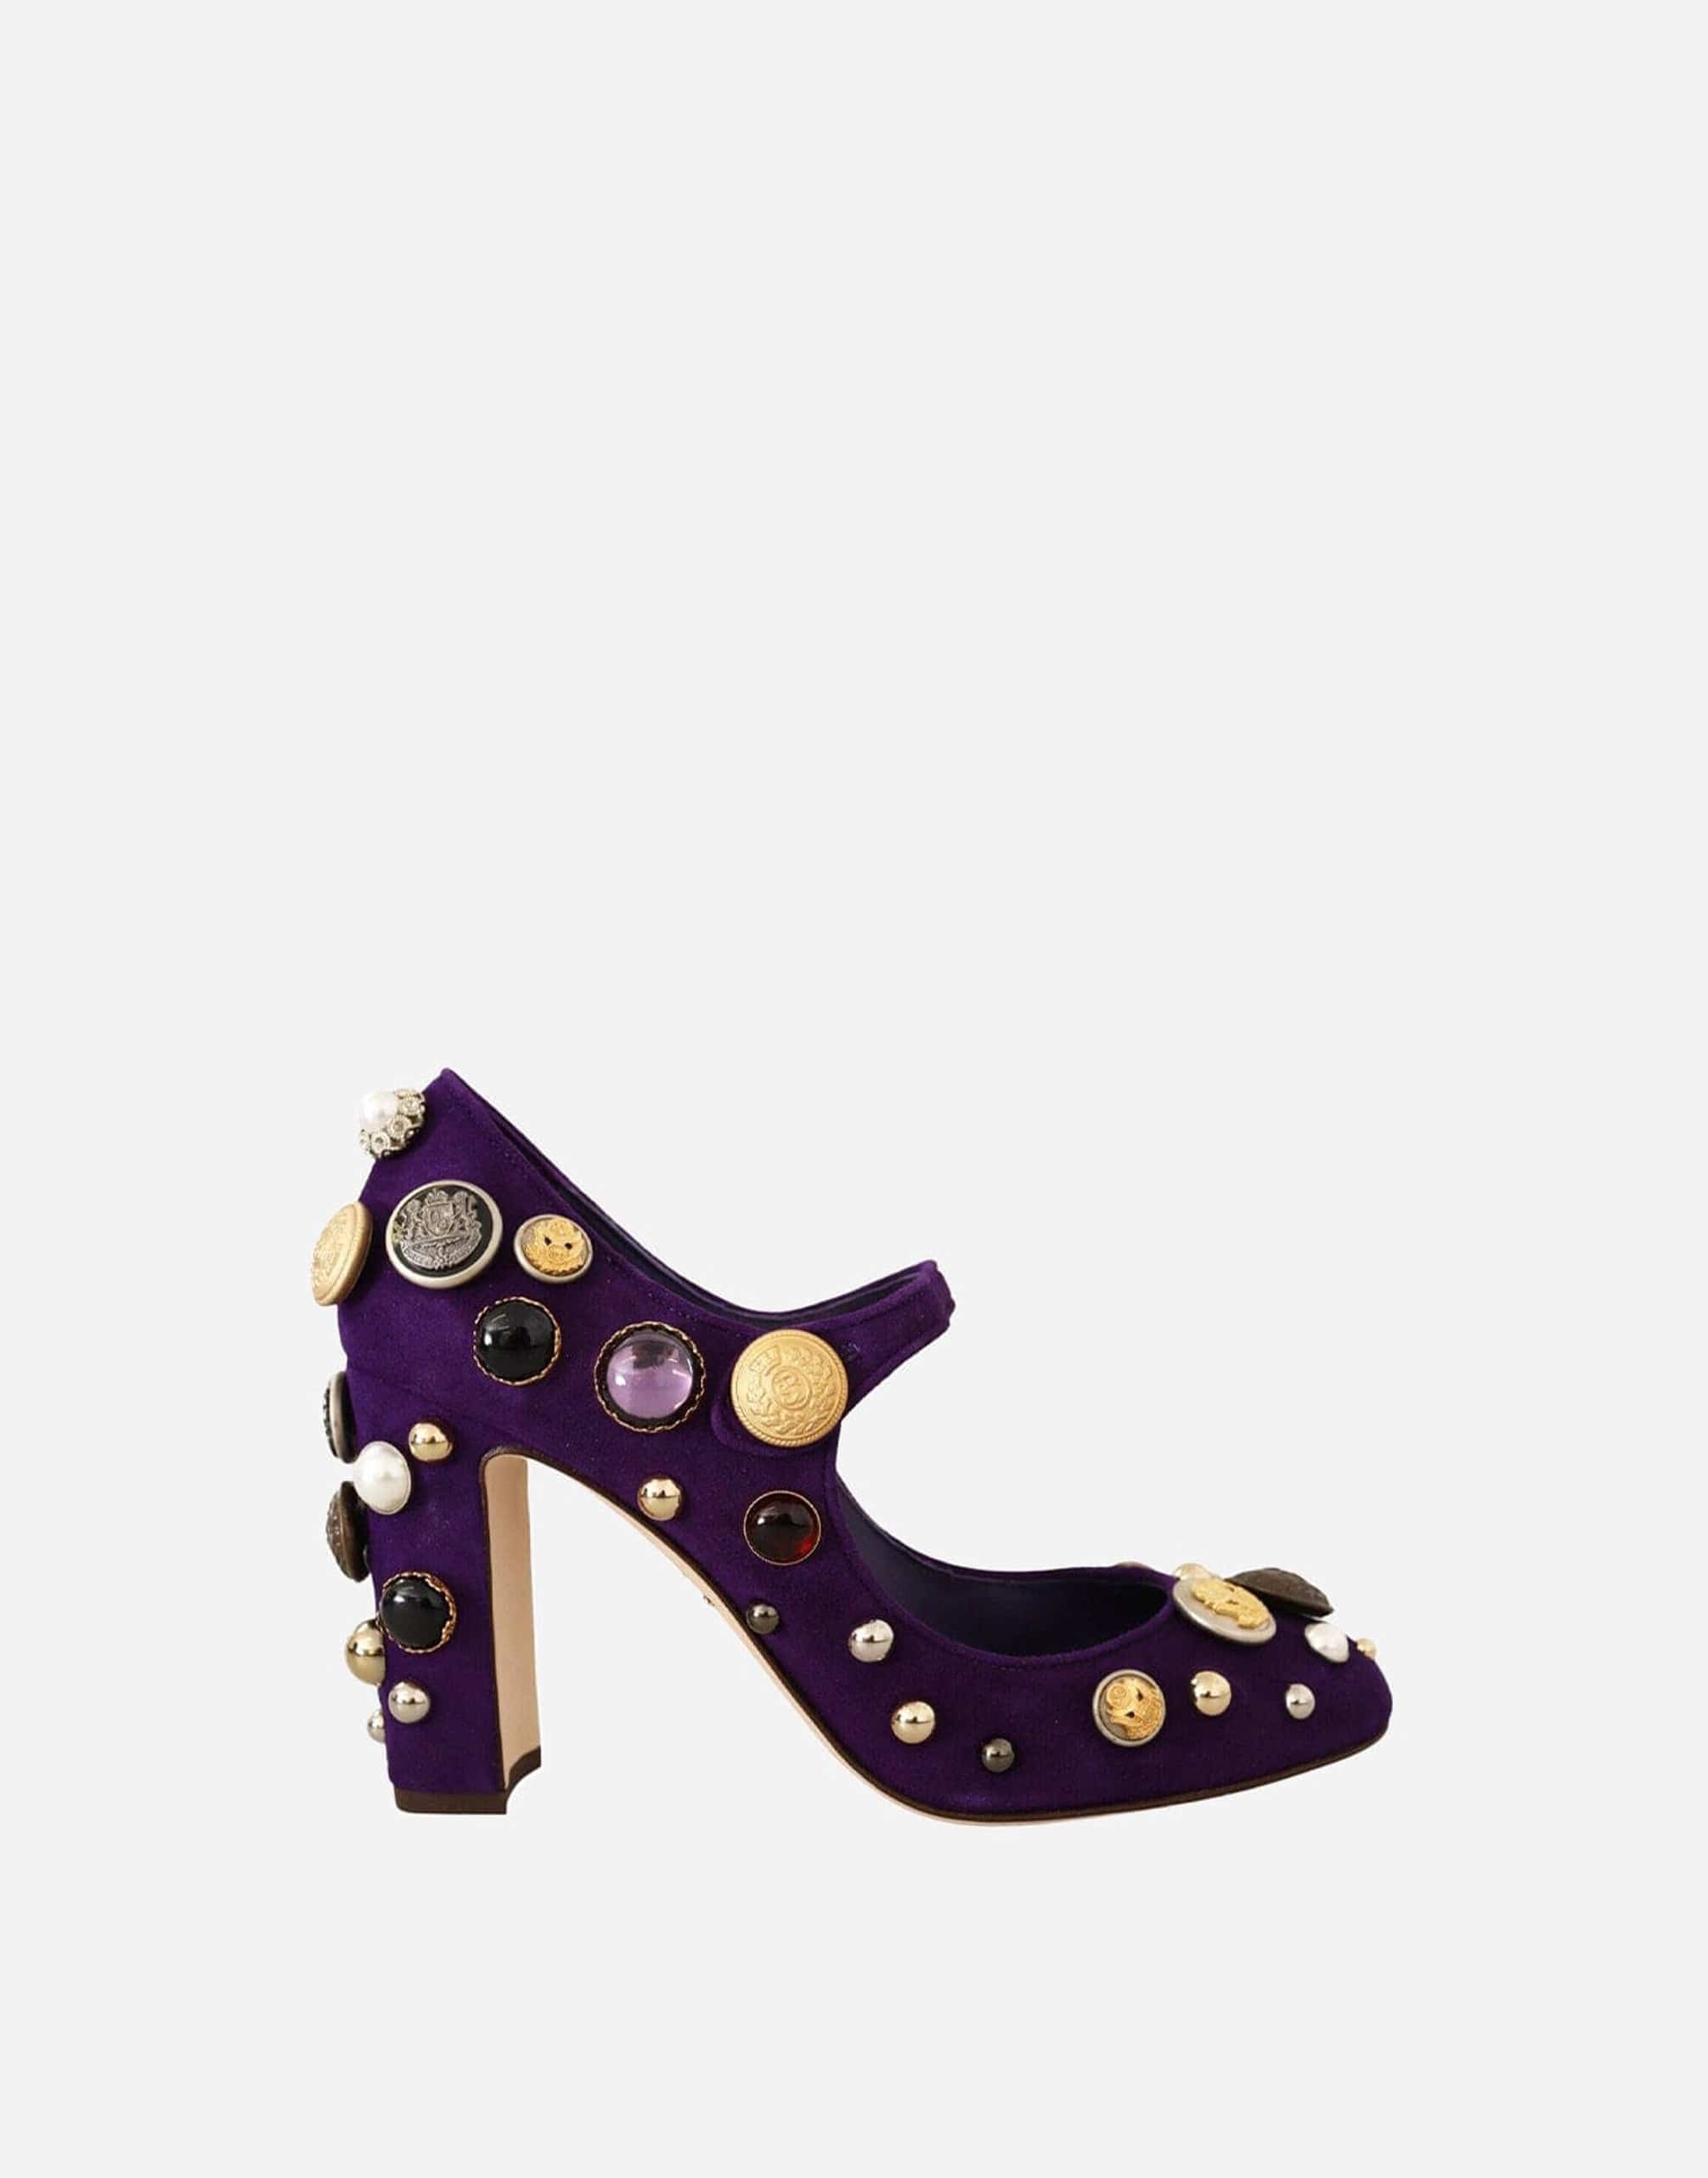 Dolce & Gabbana Mary Jane Coin Embellished Pumps